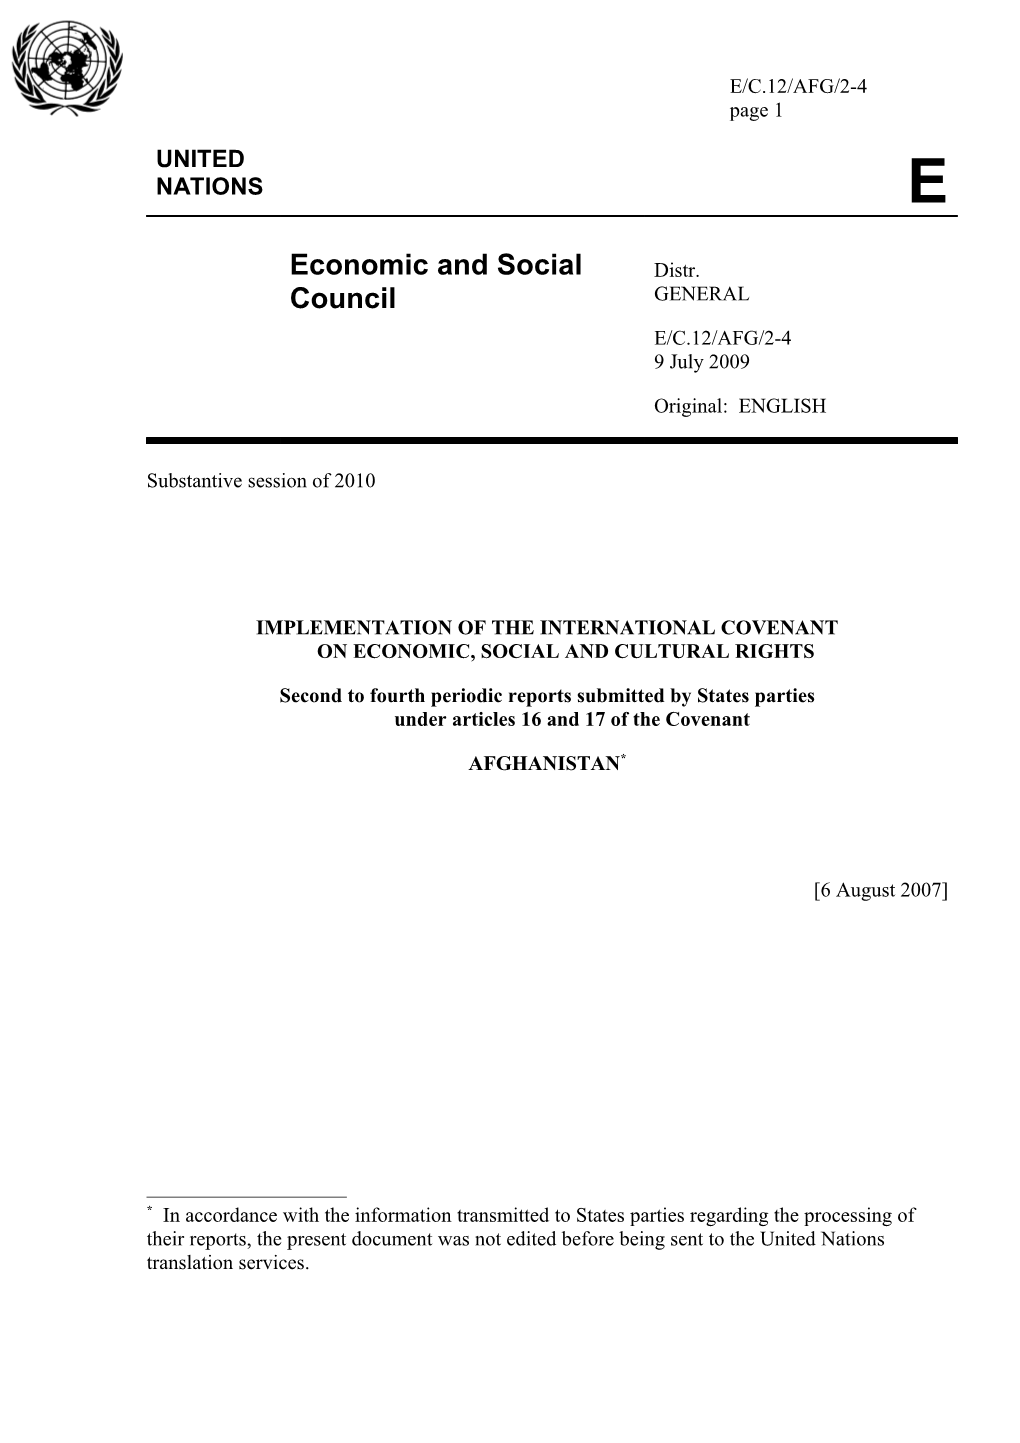 Implementation of the International Covenanton Economic, Social and Cultural Rights